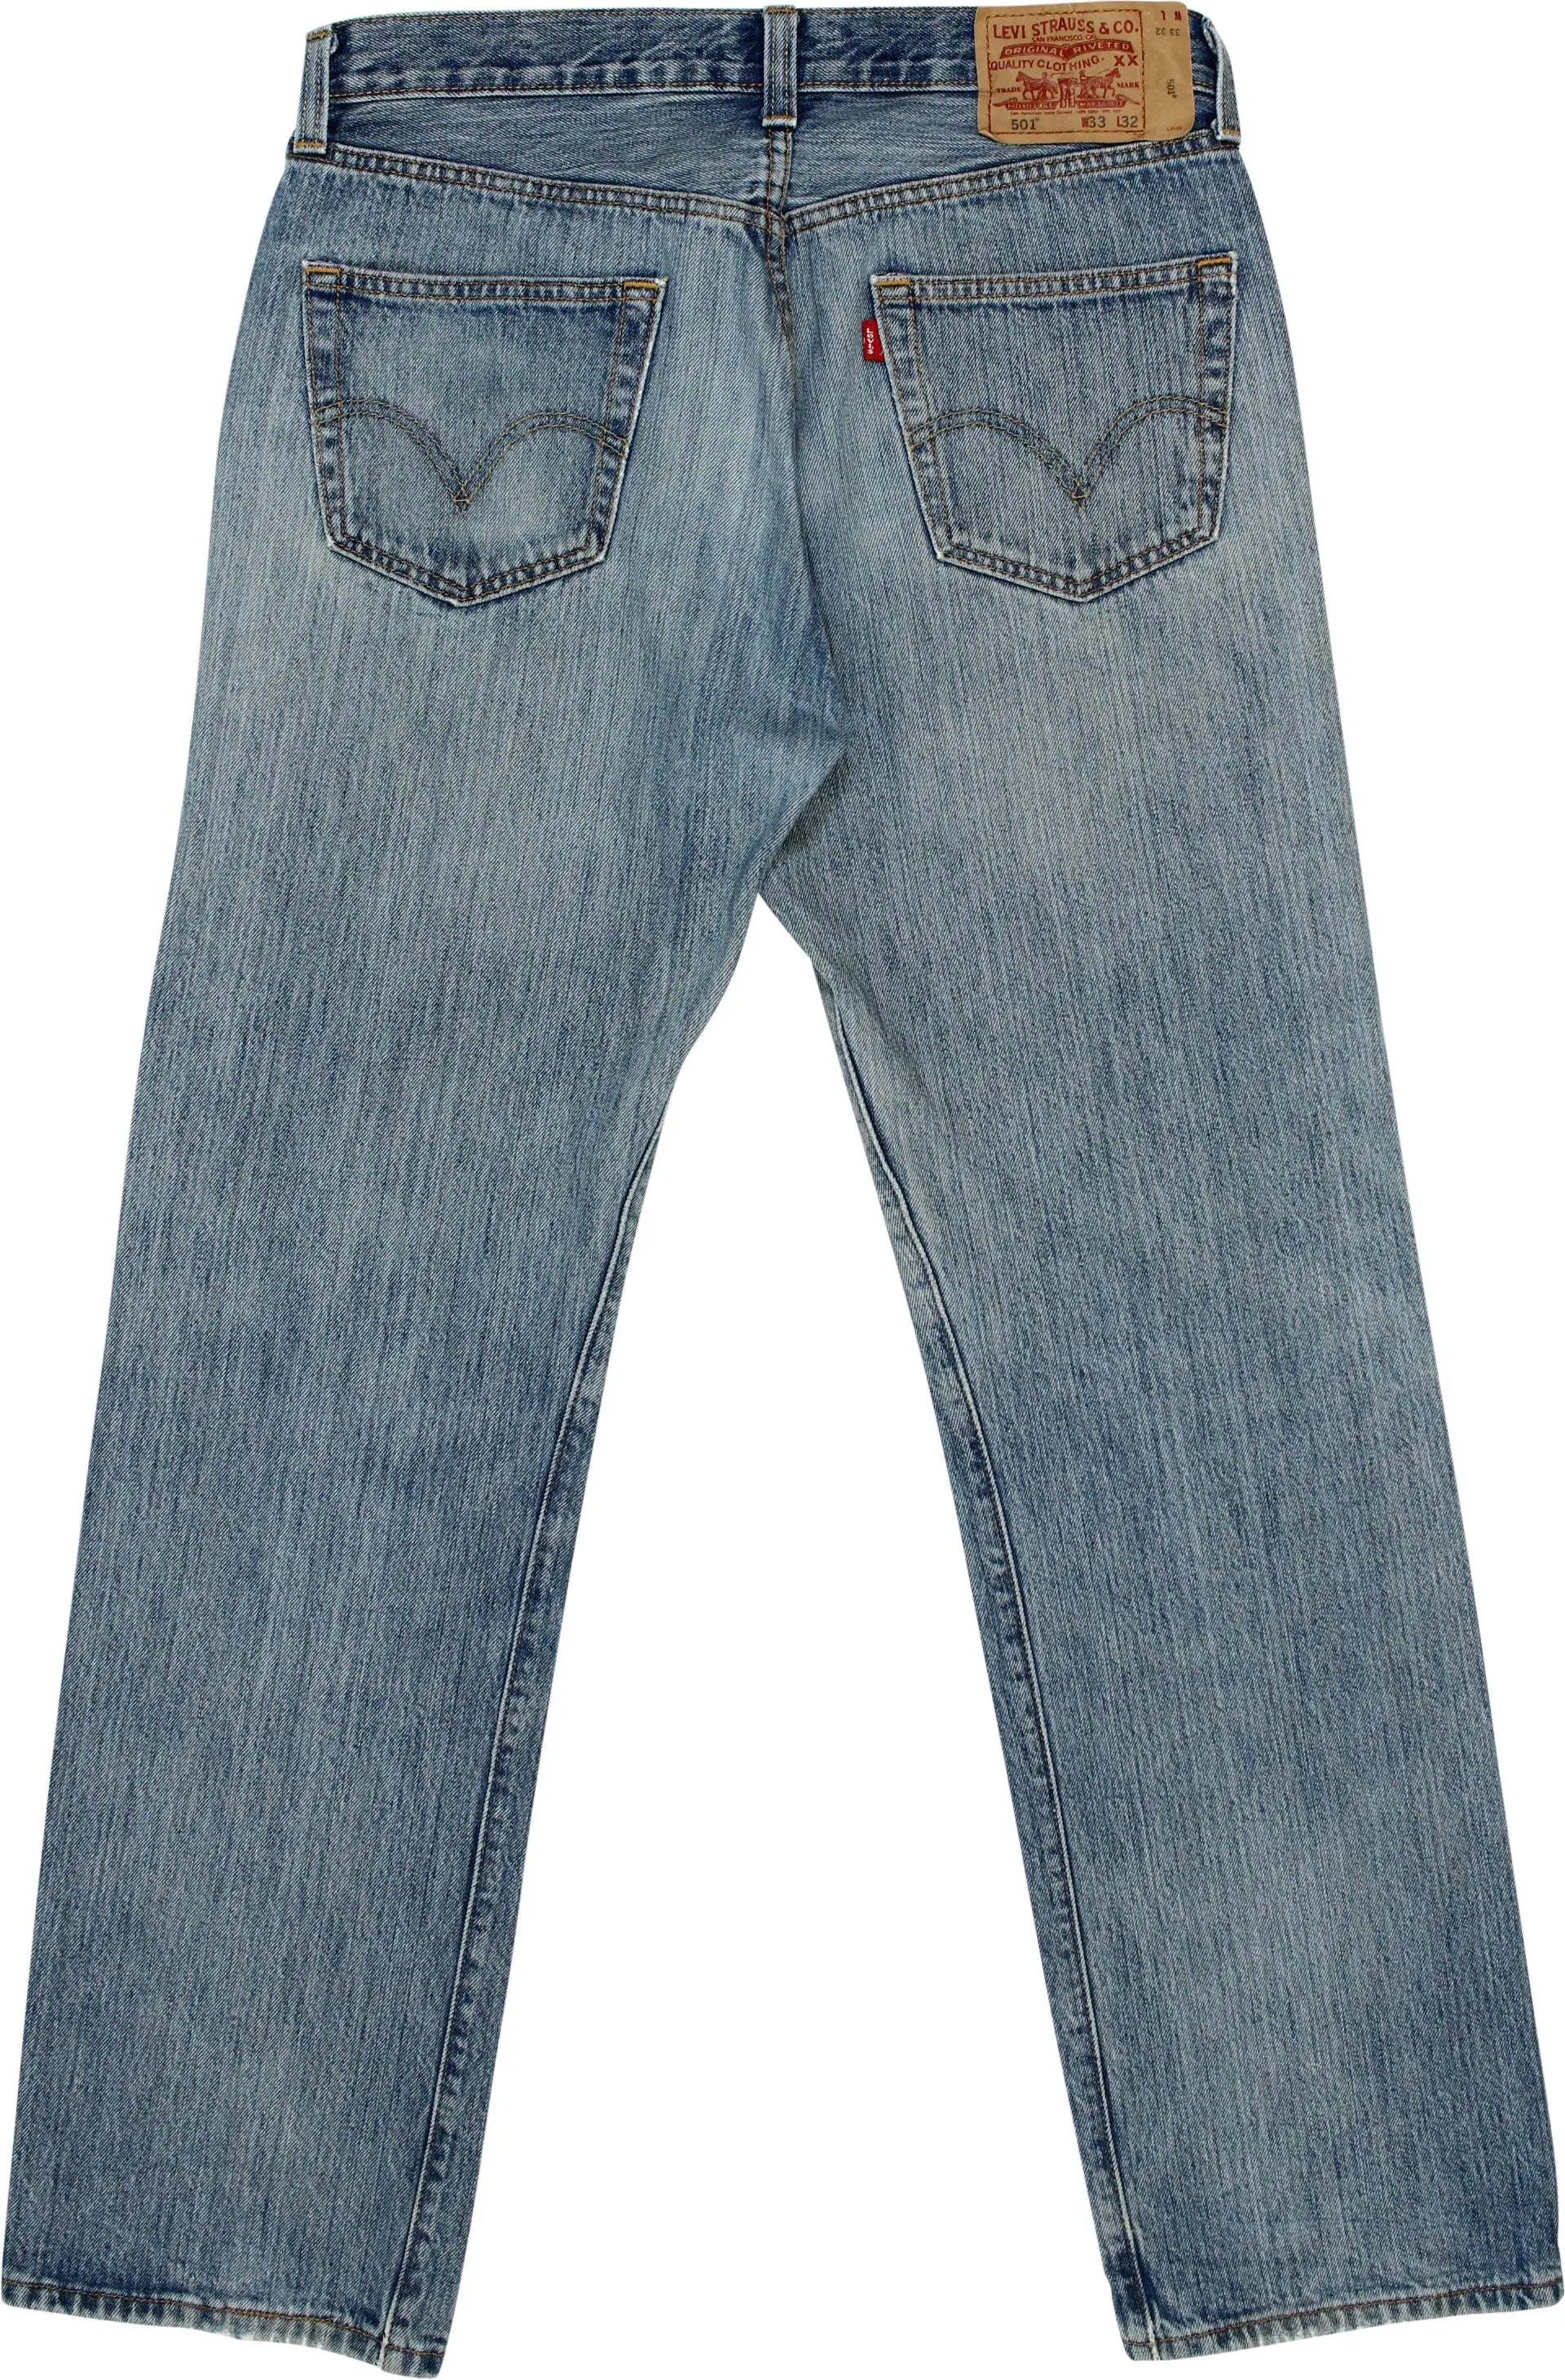 Levi's - Levi's 501 Jeans- ThriftTale.com - Vintage and second handclothing